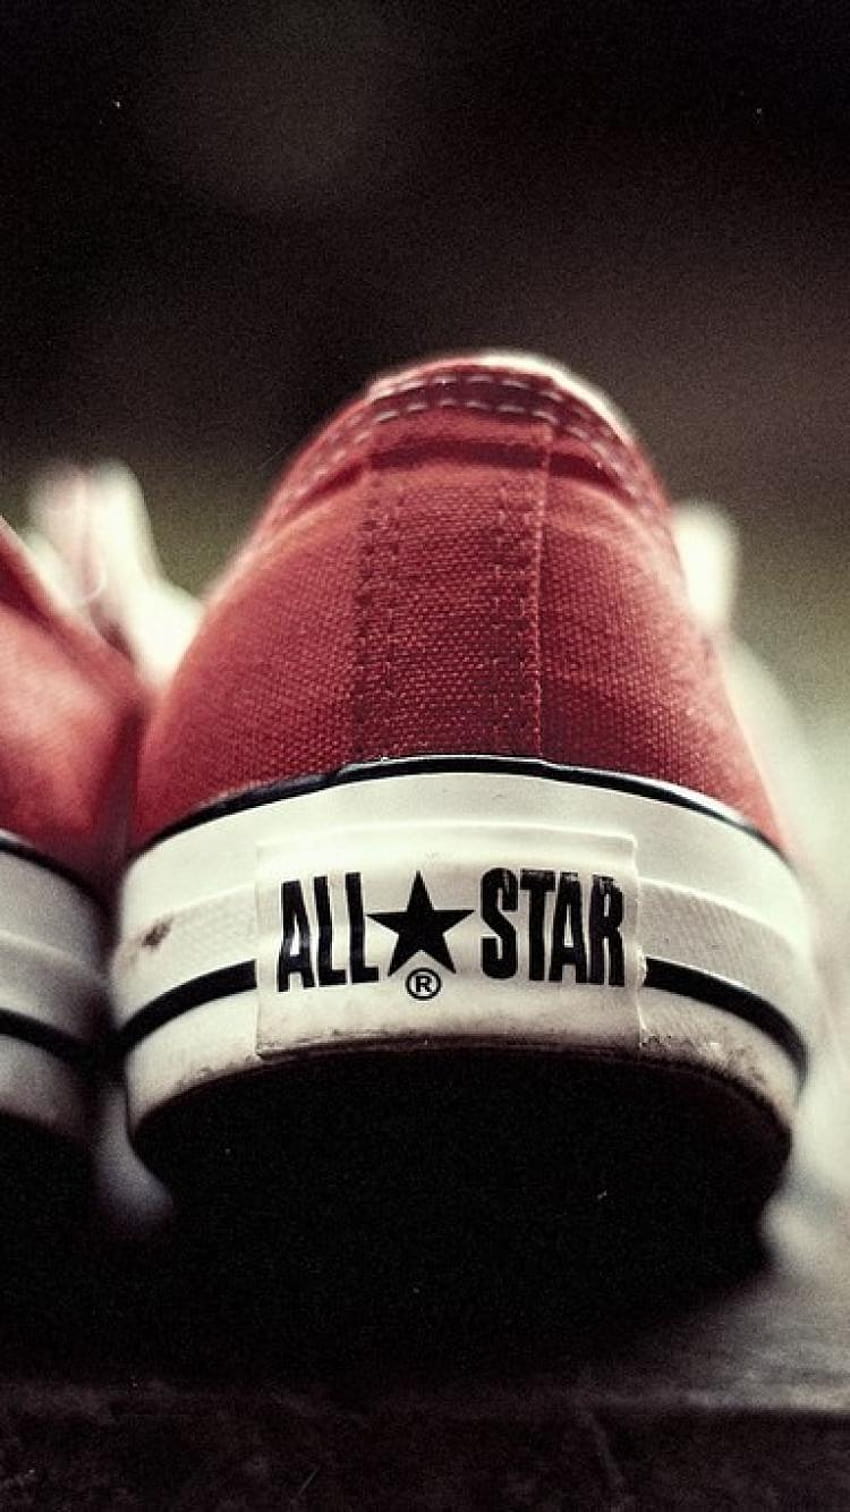 Converse posted by Zoey Simpson, converse all star shoes HD phone ...